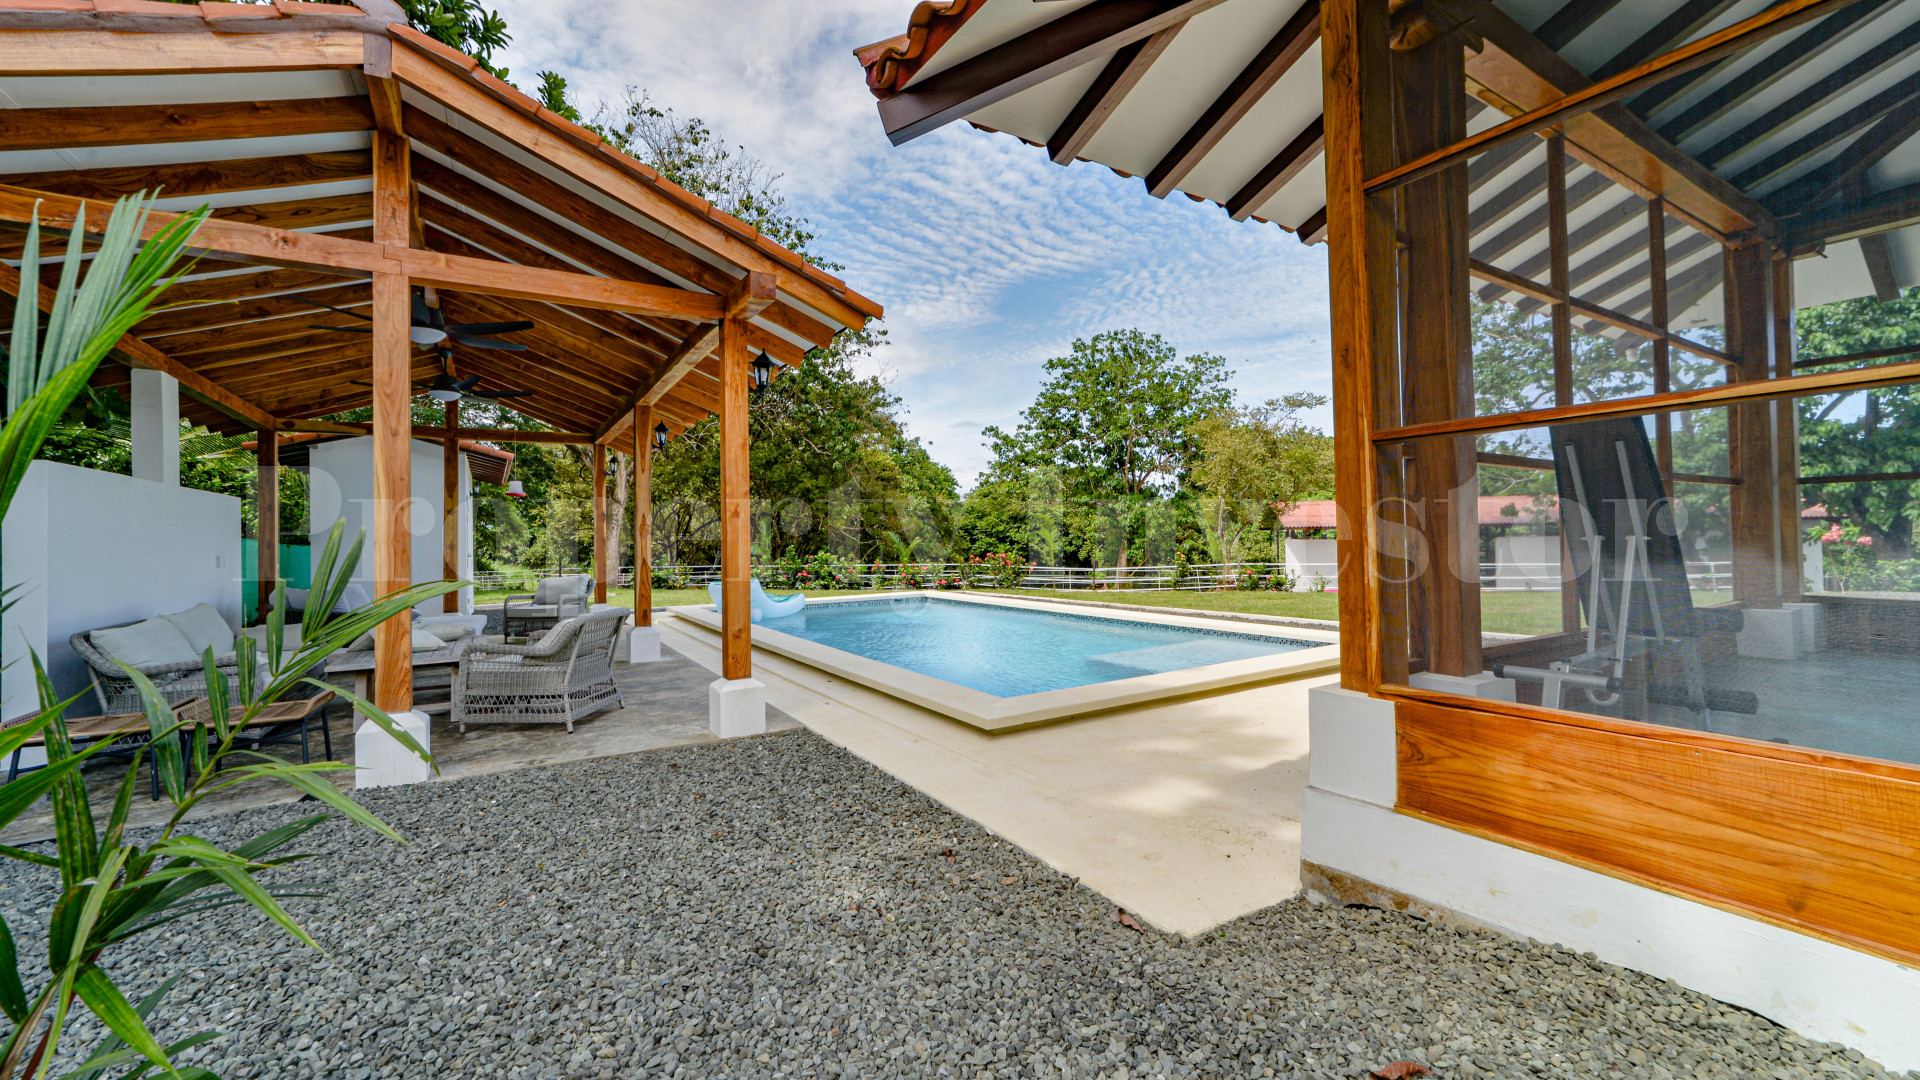 Fabulous 3 Bedroom Private Residence with Beautiful Landscaped Gardens for Sale in Pedasi, Panama